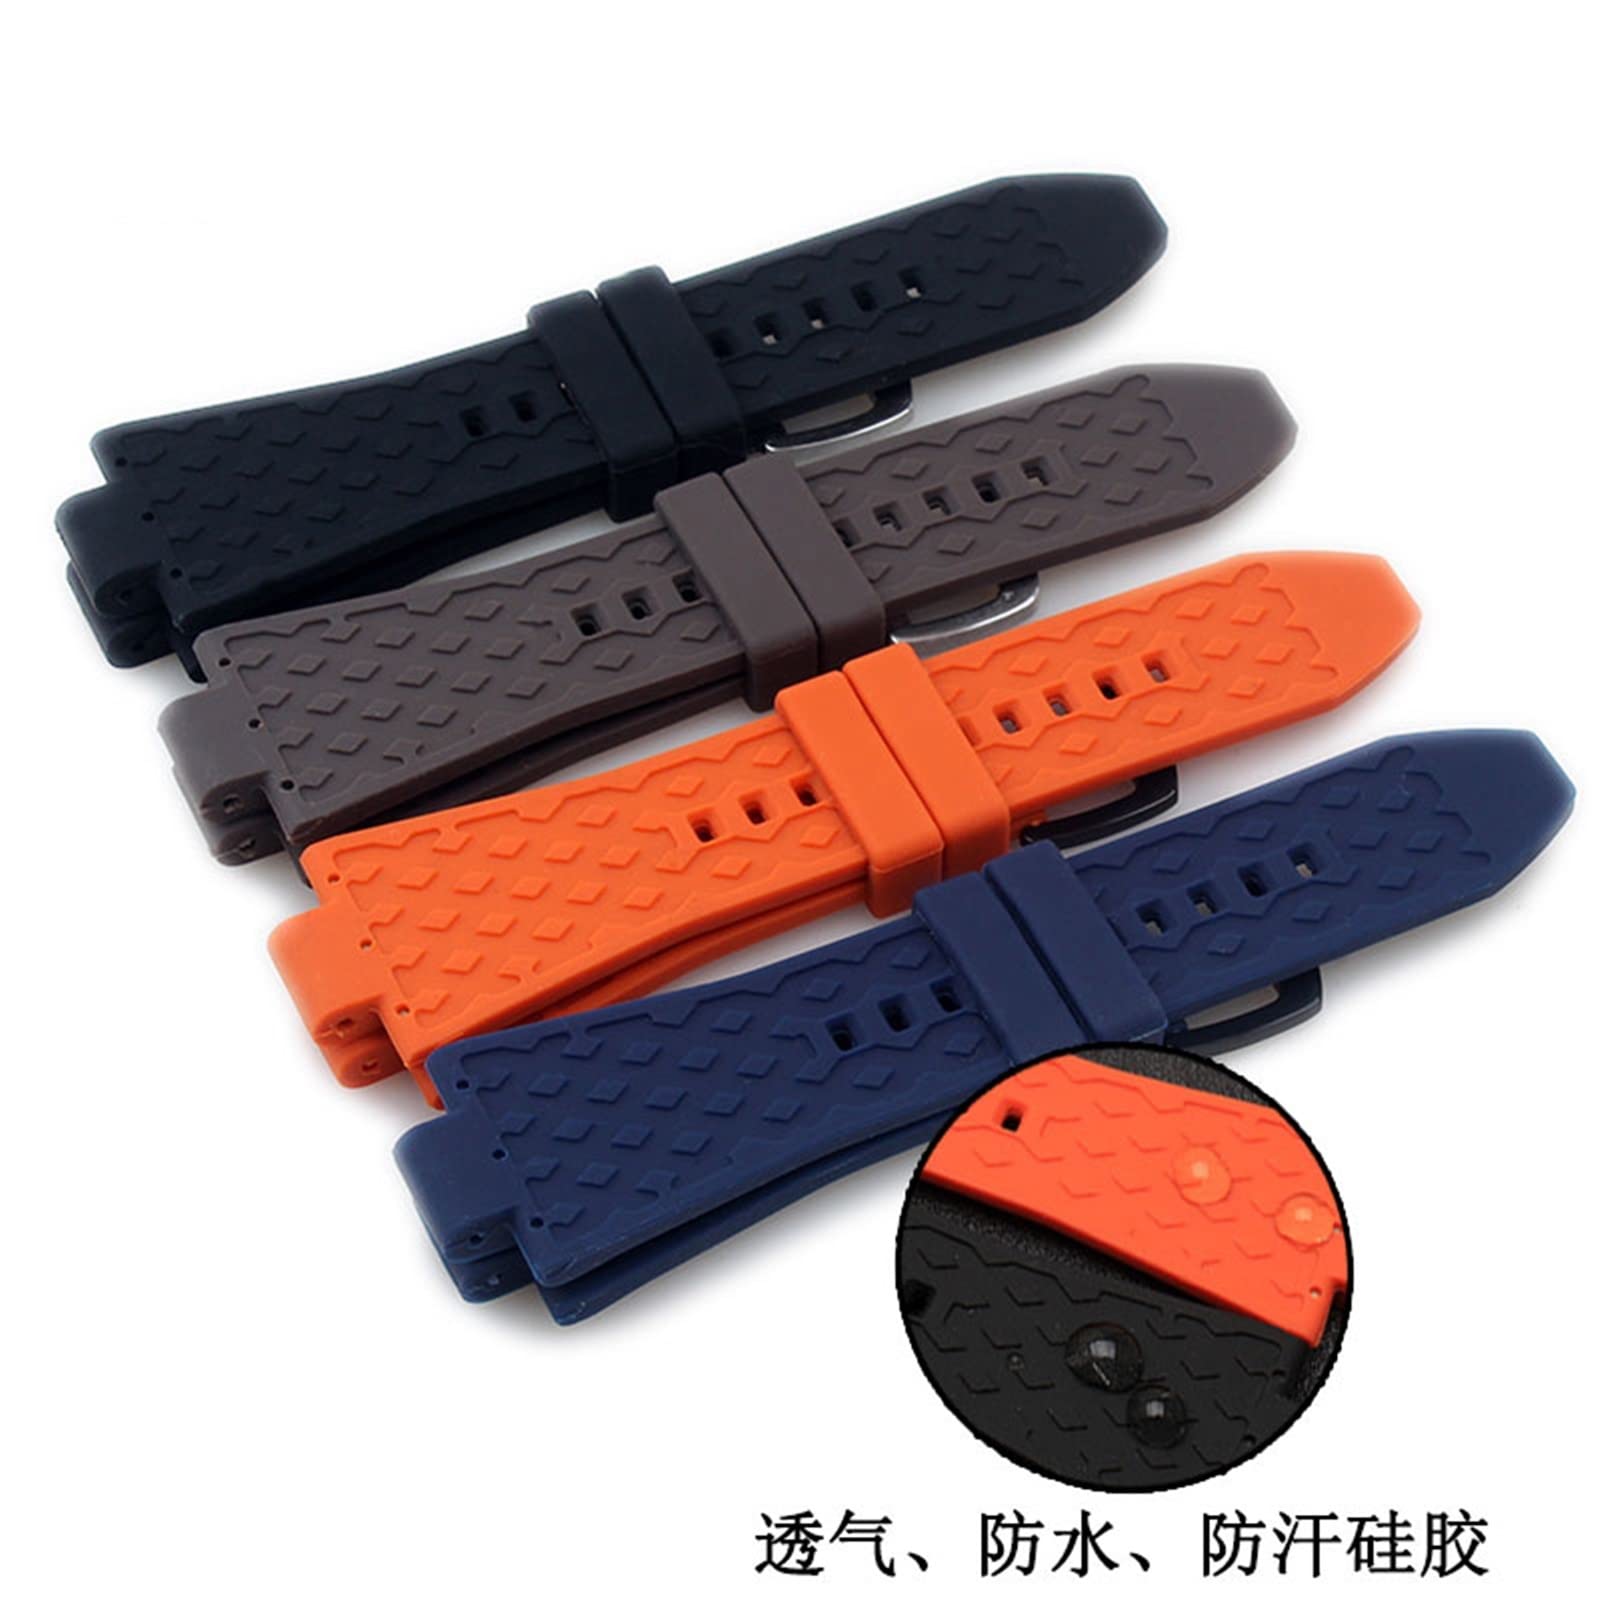 OSGC 29x13mm Silicone rubber Concave convex Watch Strap For Michael Kors MK9019 MK8295 MK8492 MK9020 MK9020 (Color : 26mm, Size : 29X13mm)